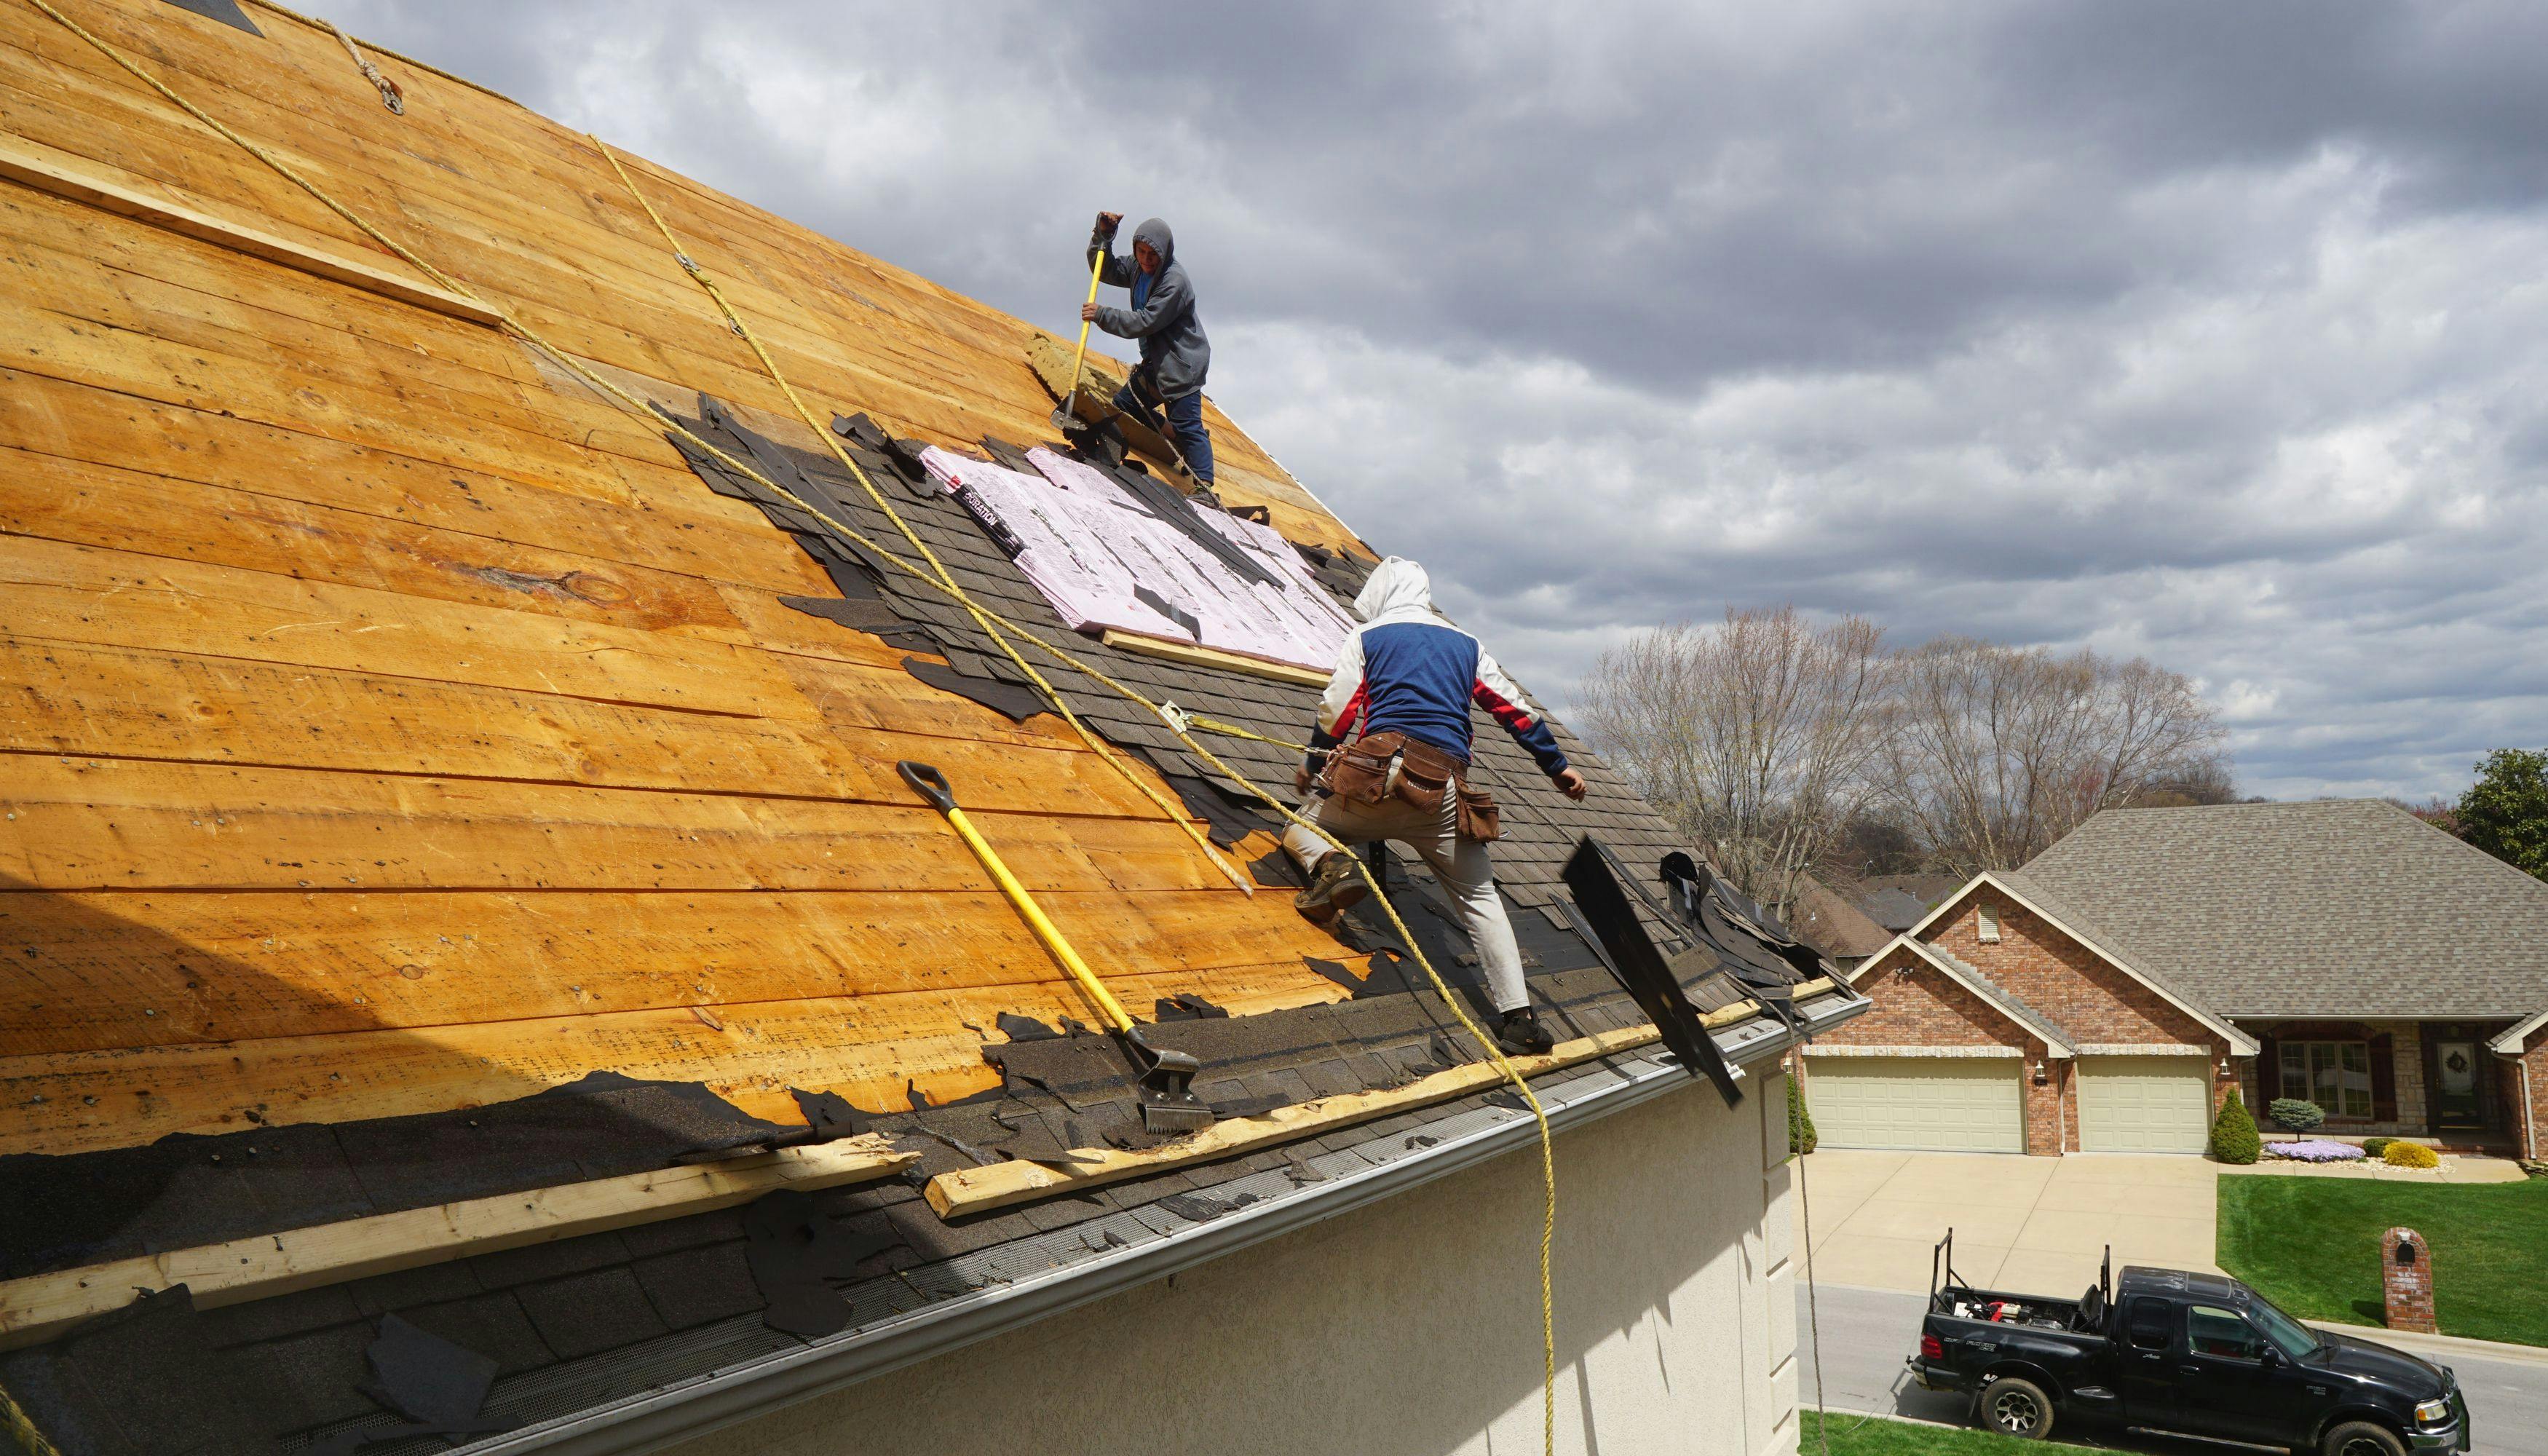 Roofers removing old roof during renovation process.